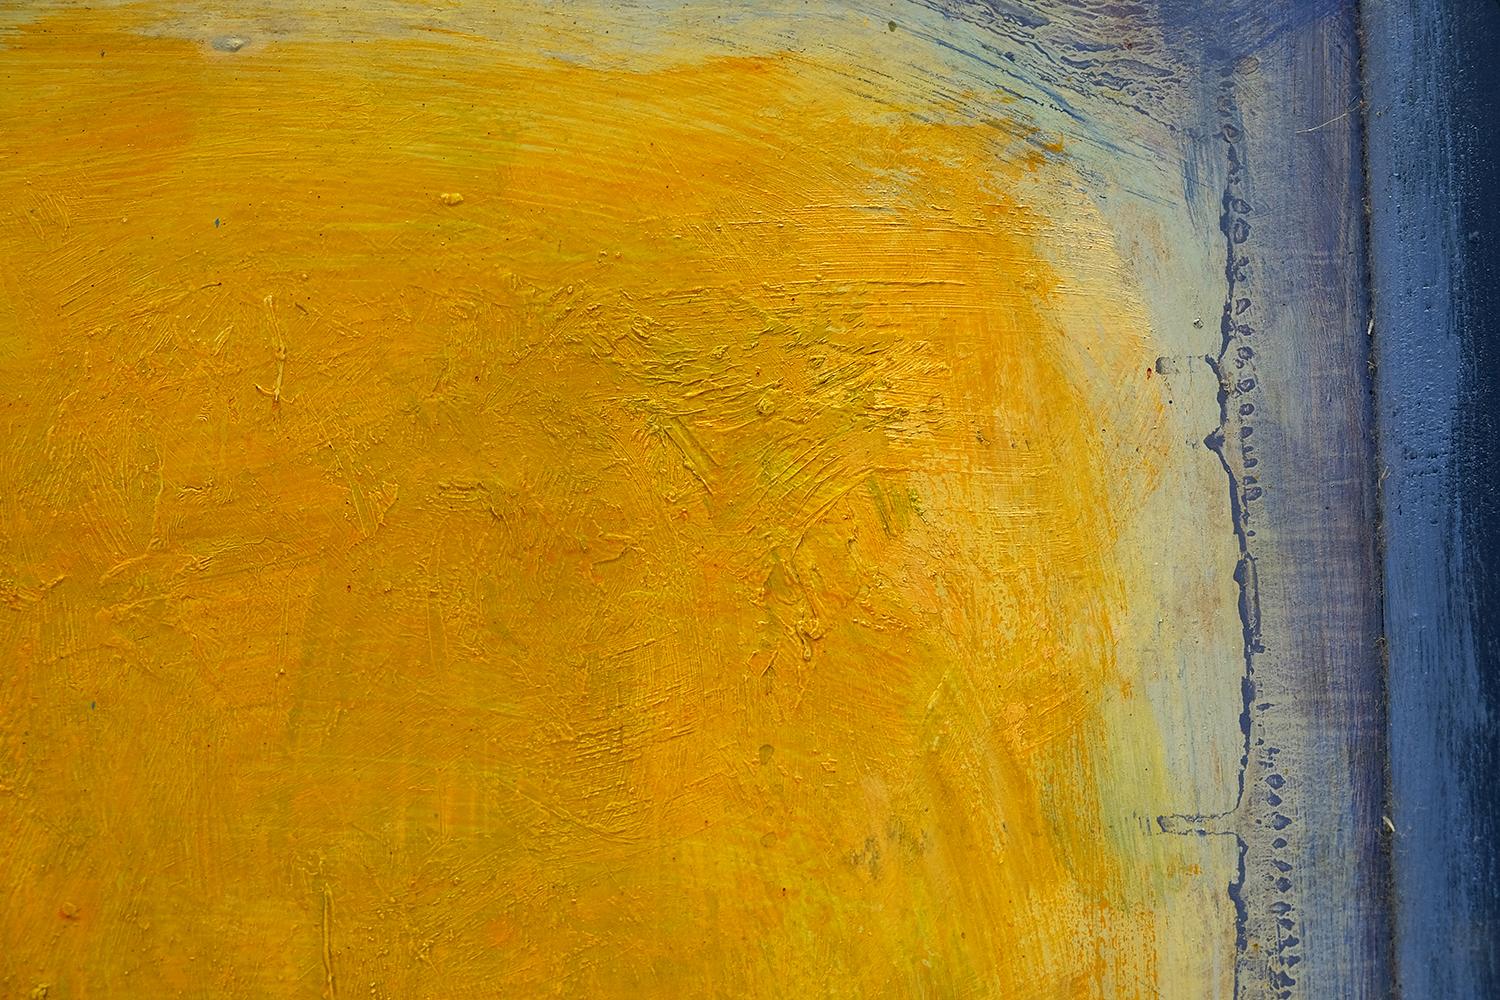 SCREEN OF YELLOW LIGHT  - Abstract Painting by Grigorij Ivanov